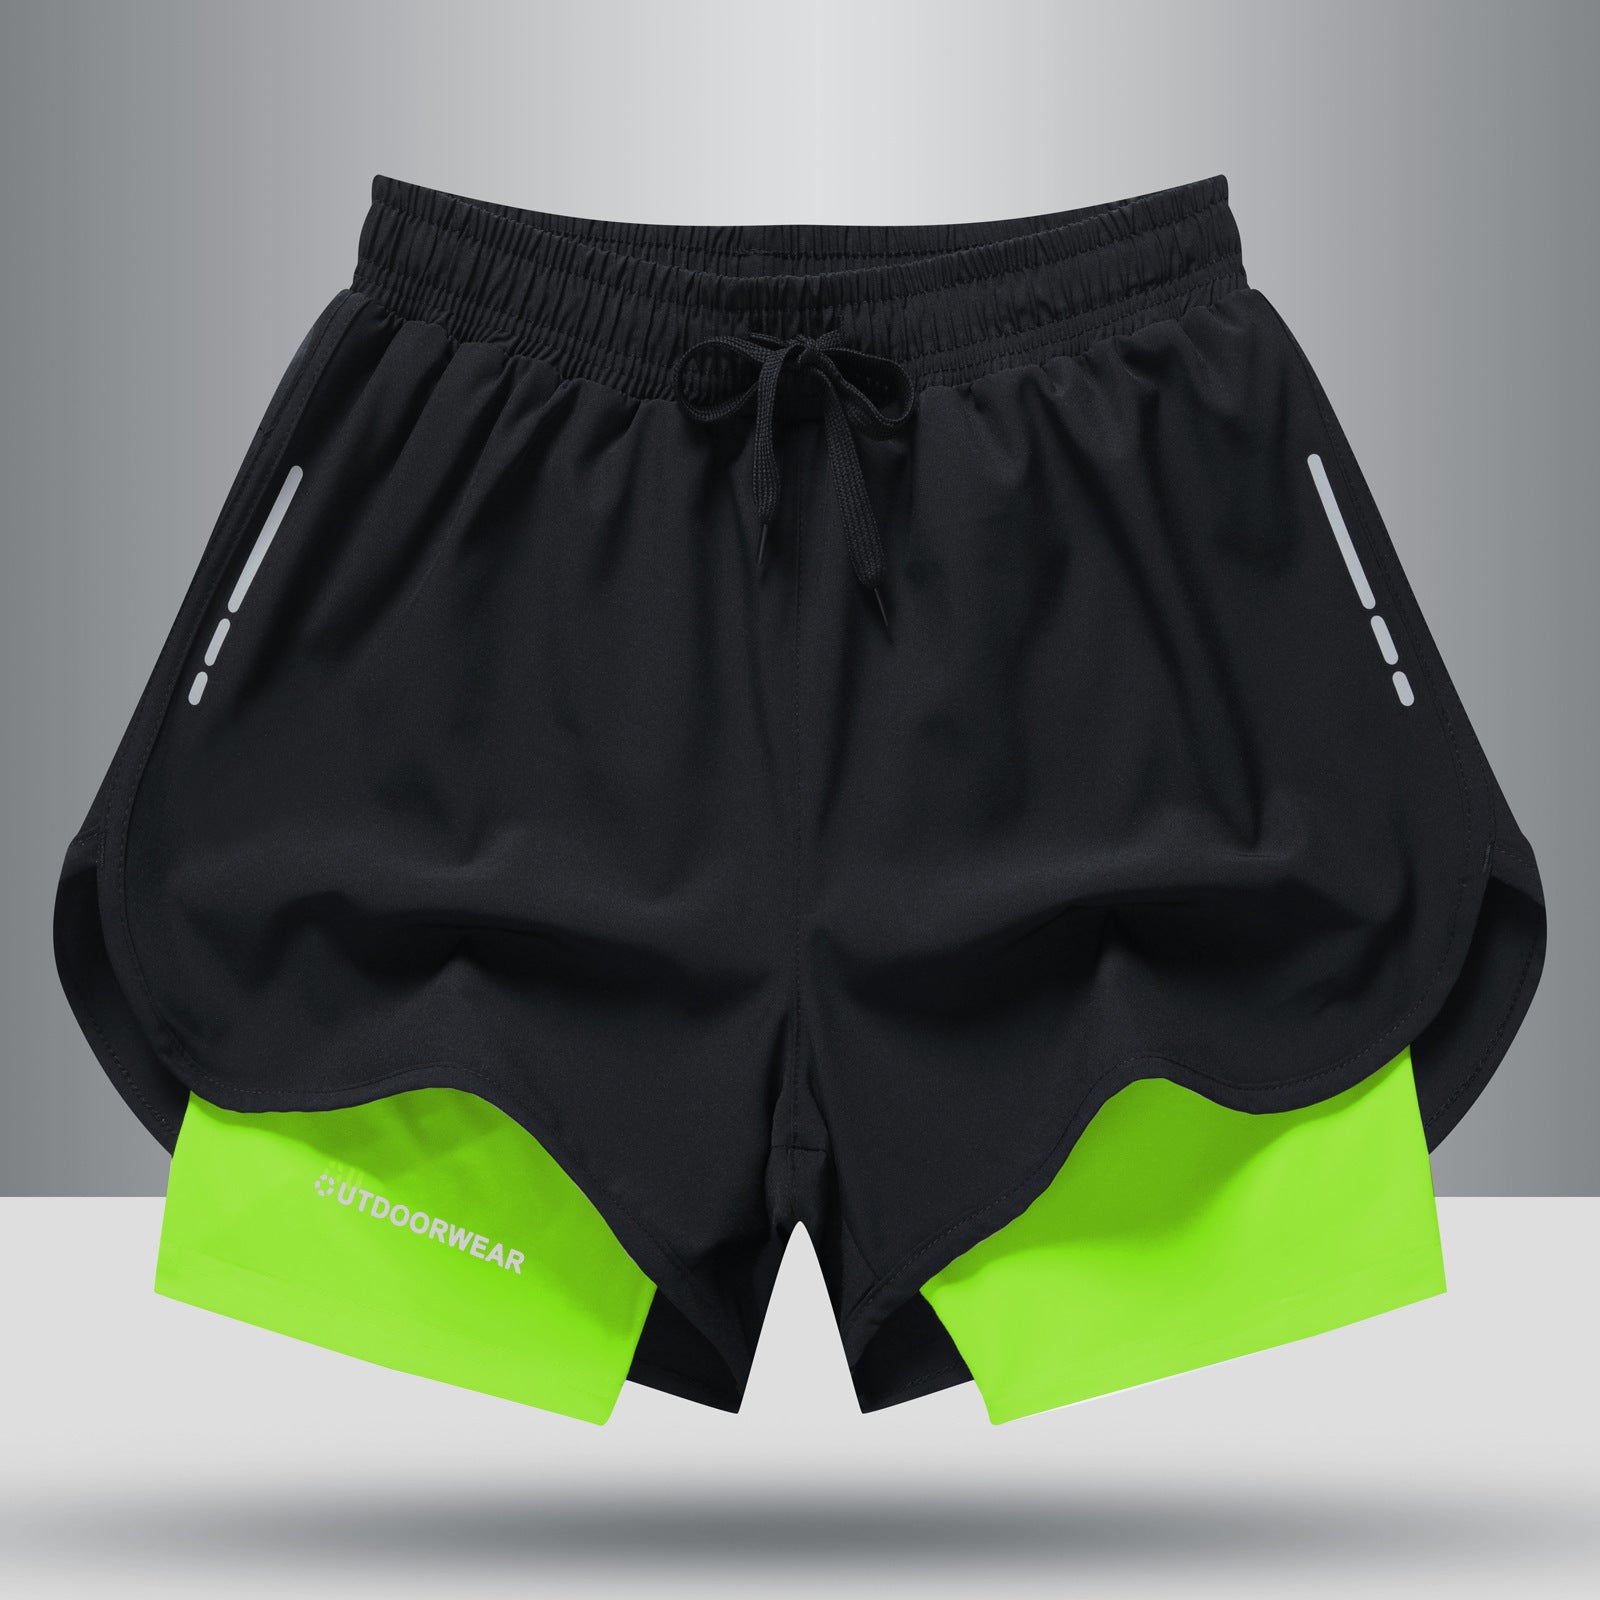 Men's Drawstring Sports Shorts Double Layer Quick Dry High Elasticity Activewear Pants